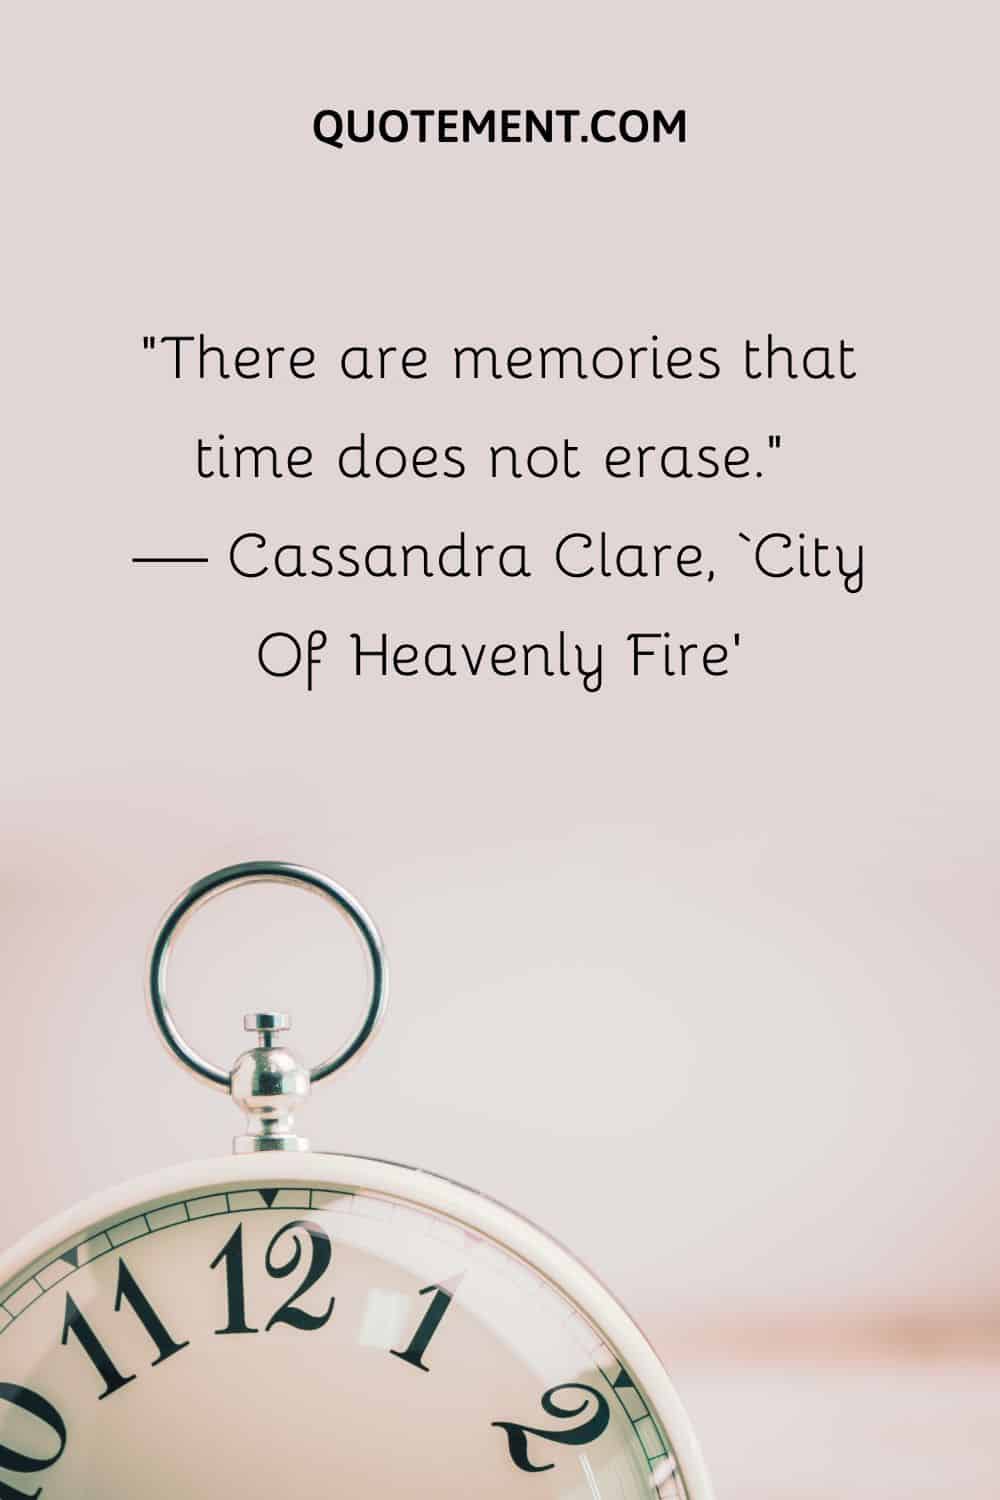 There are memories that time does not erase